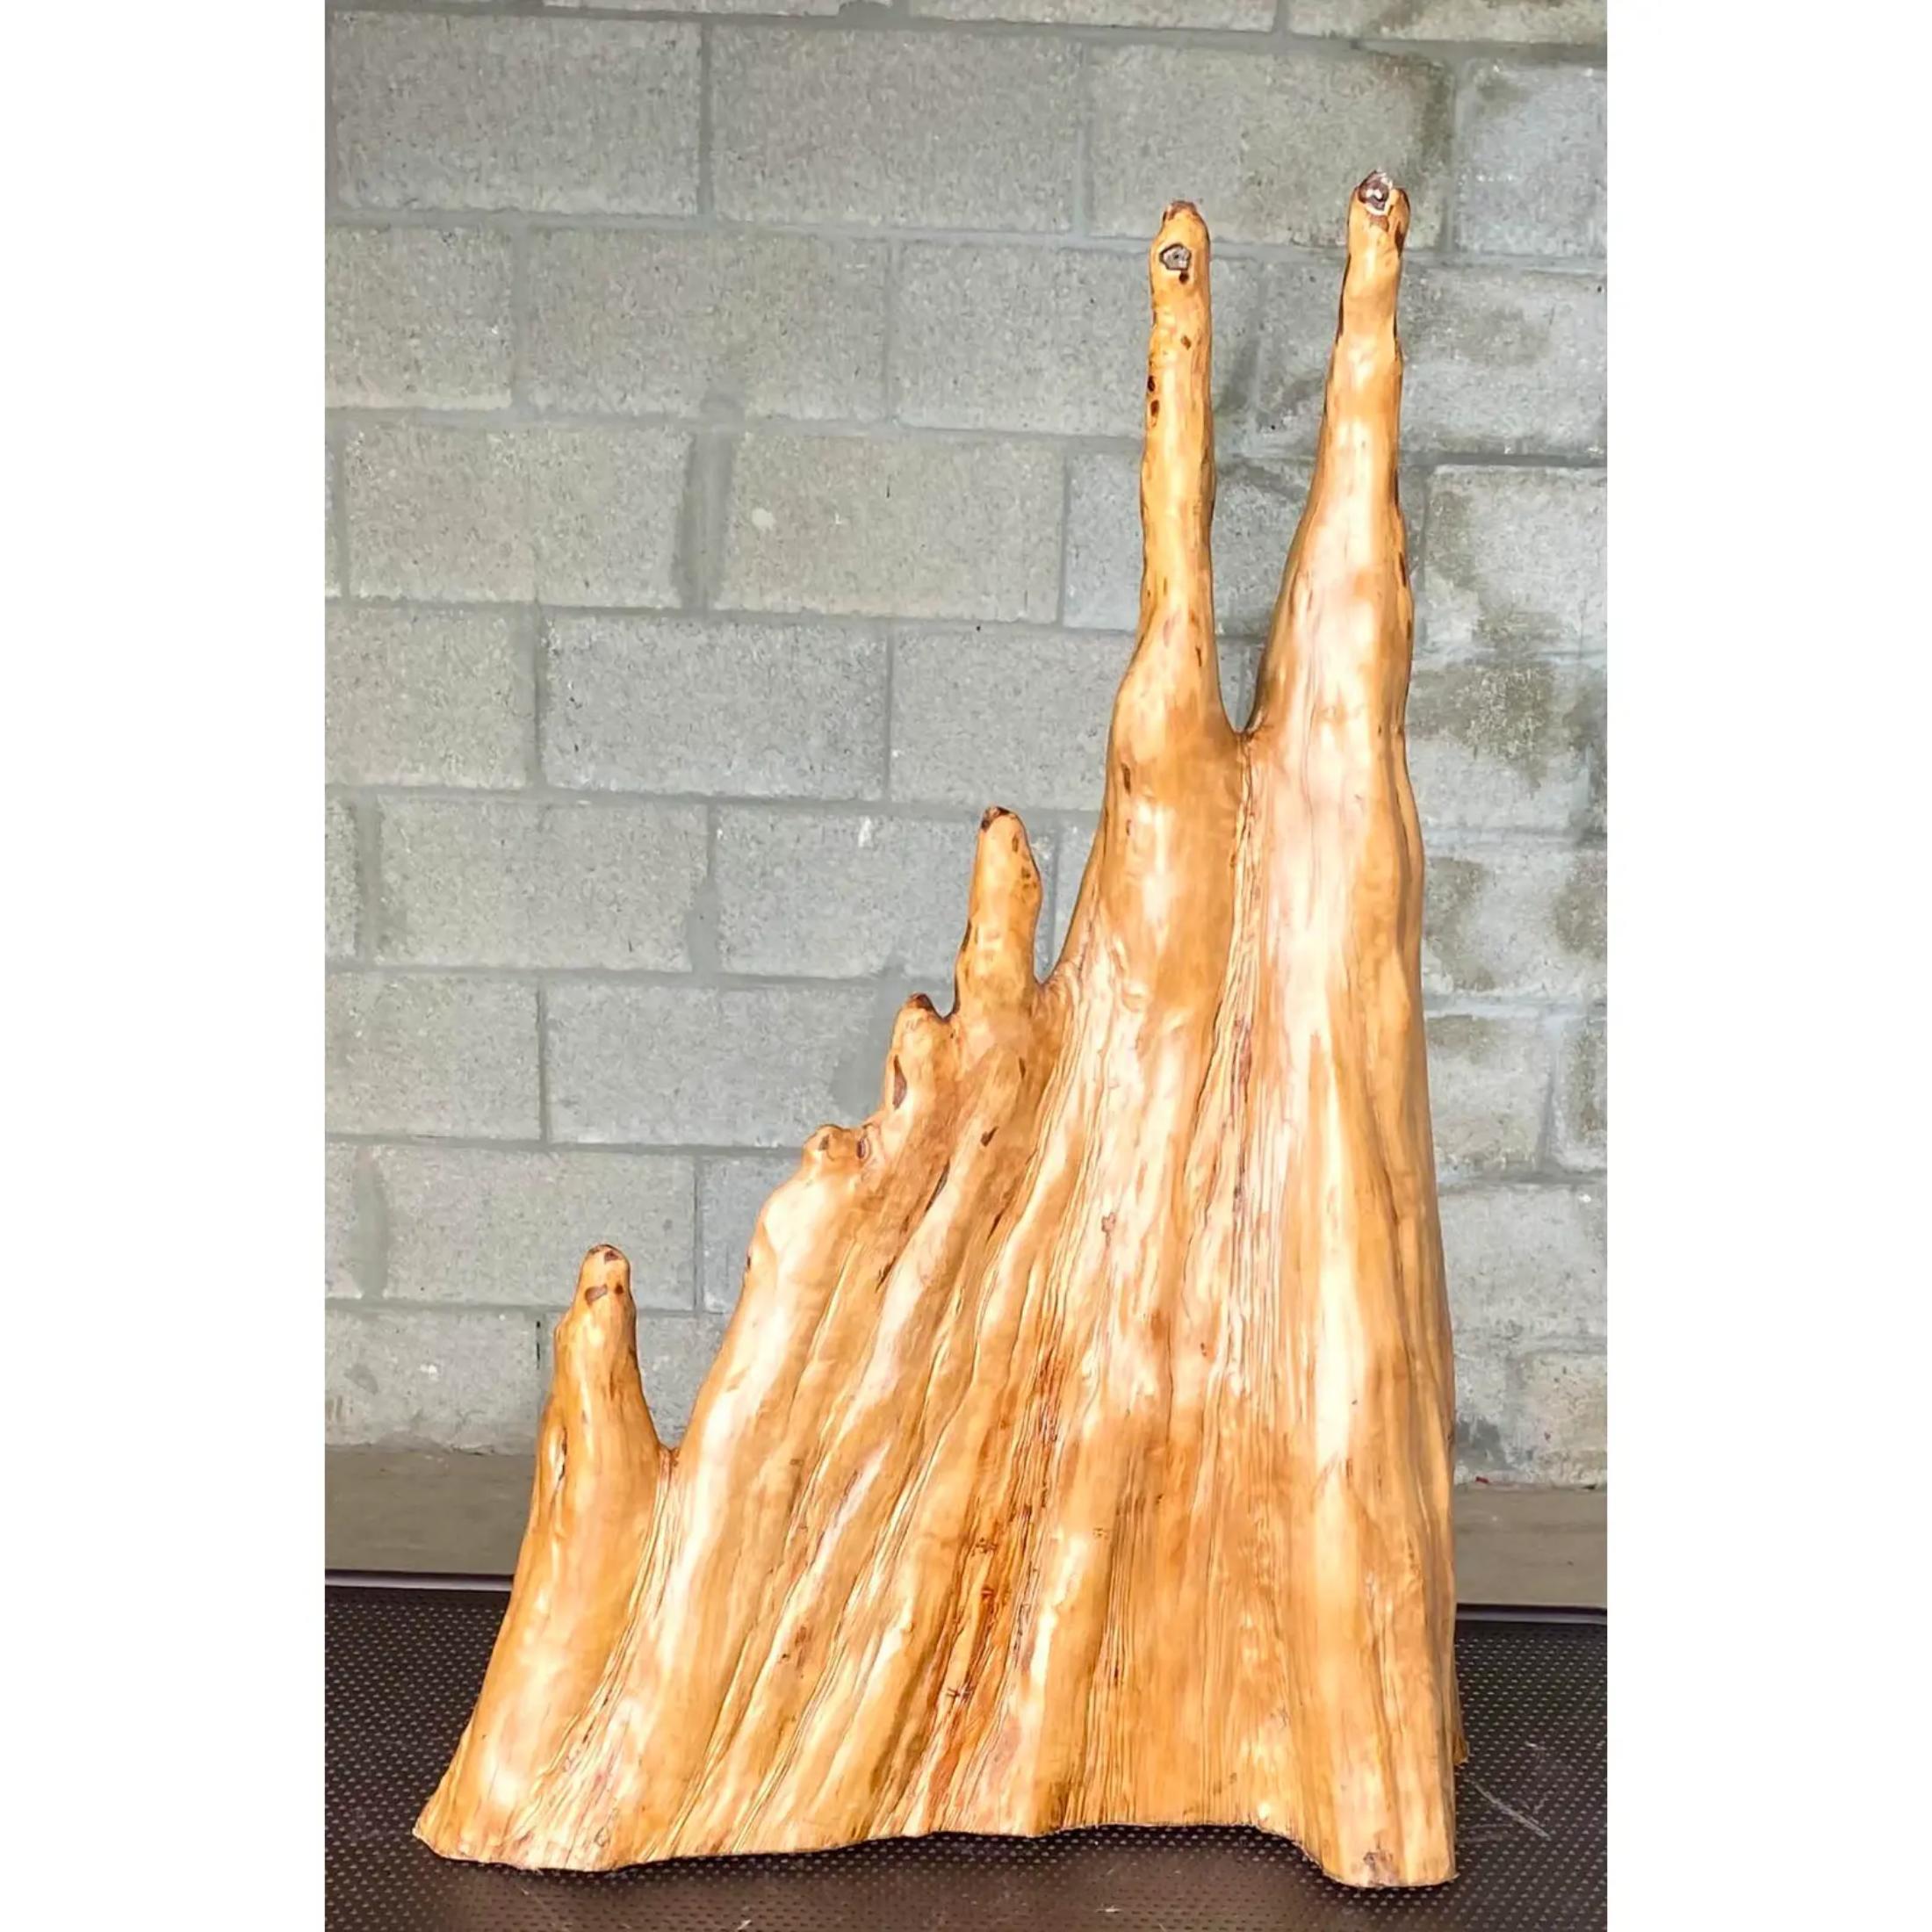 Amazing vintage coastal cypress knuckle sculpture. Exceptionally large and cut to stand alone. Beautiful and dramatic wood grain detail and warm color. Acquired from a Palm Beach estate